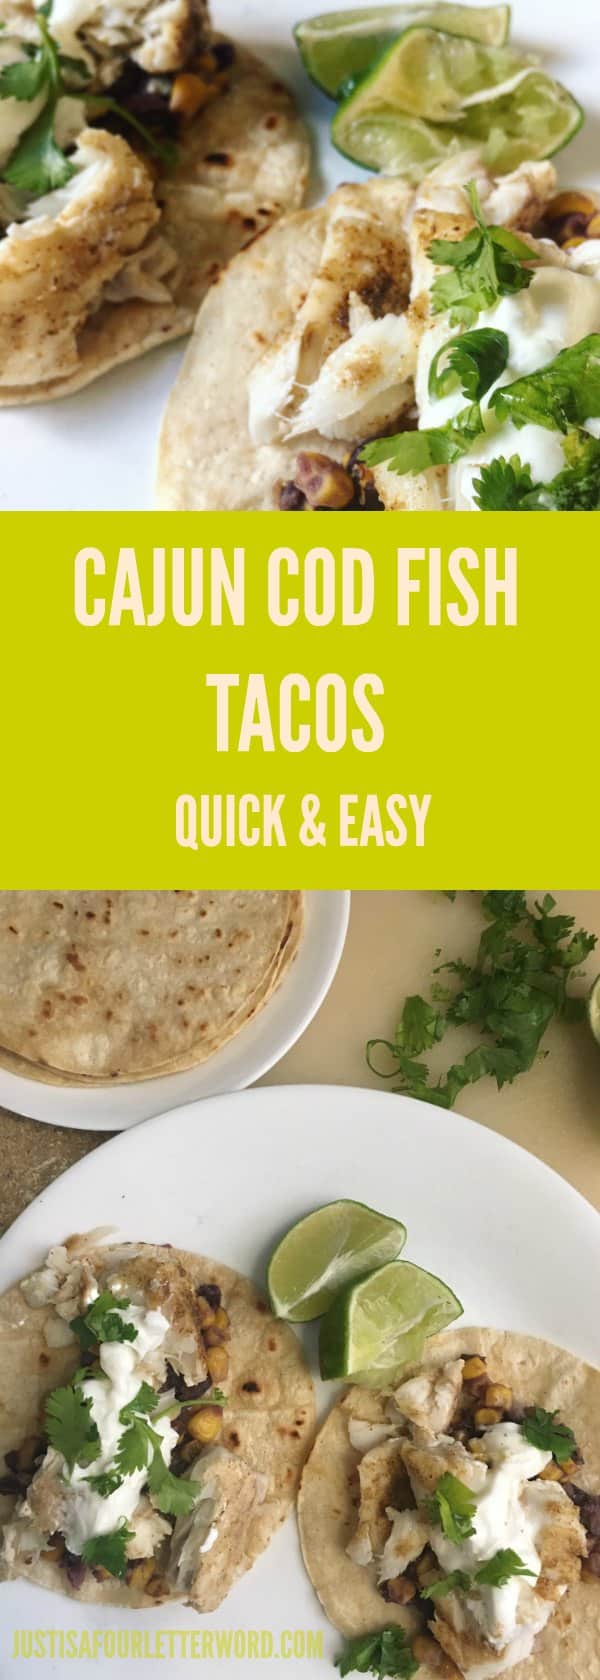 Grab this Cajun Cod Fish Taco recipe for a quick & easy family dinner. Perfect for Taco Tuesday!